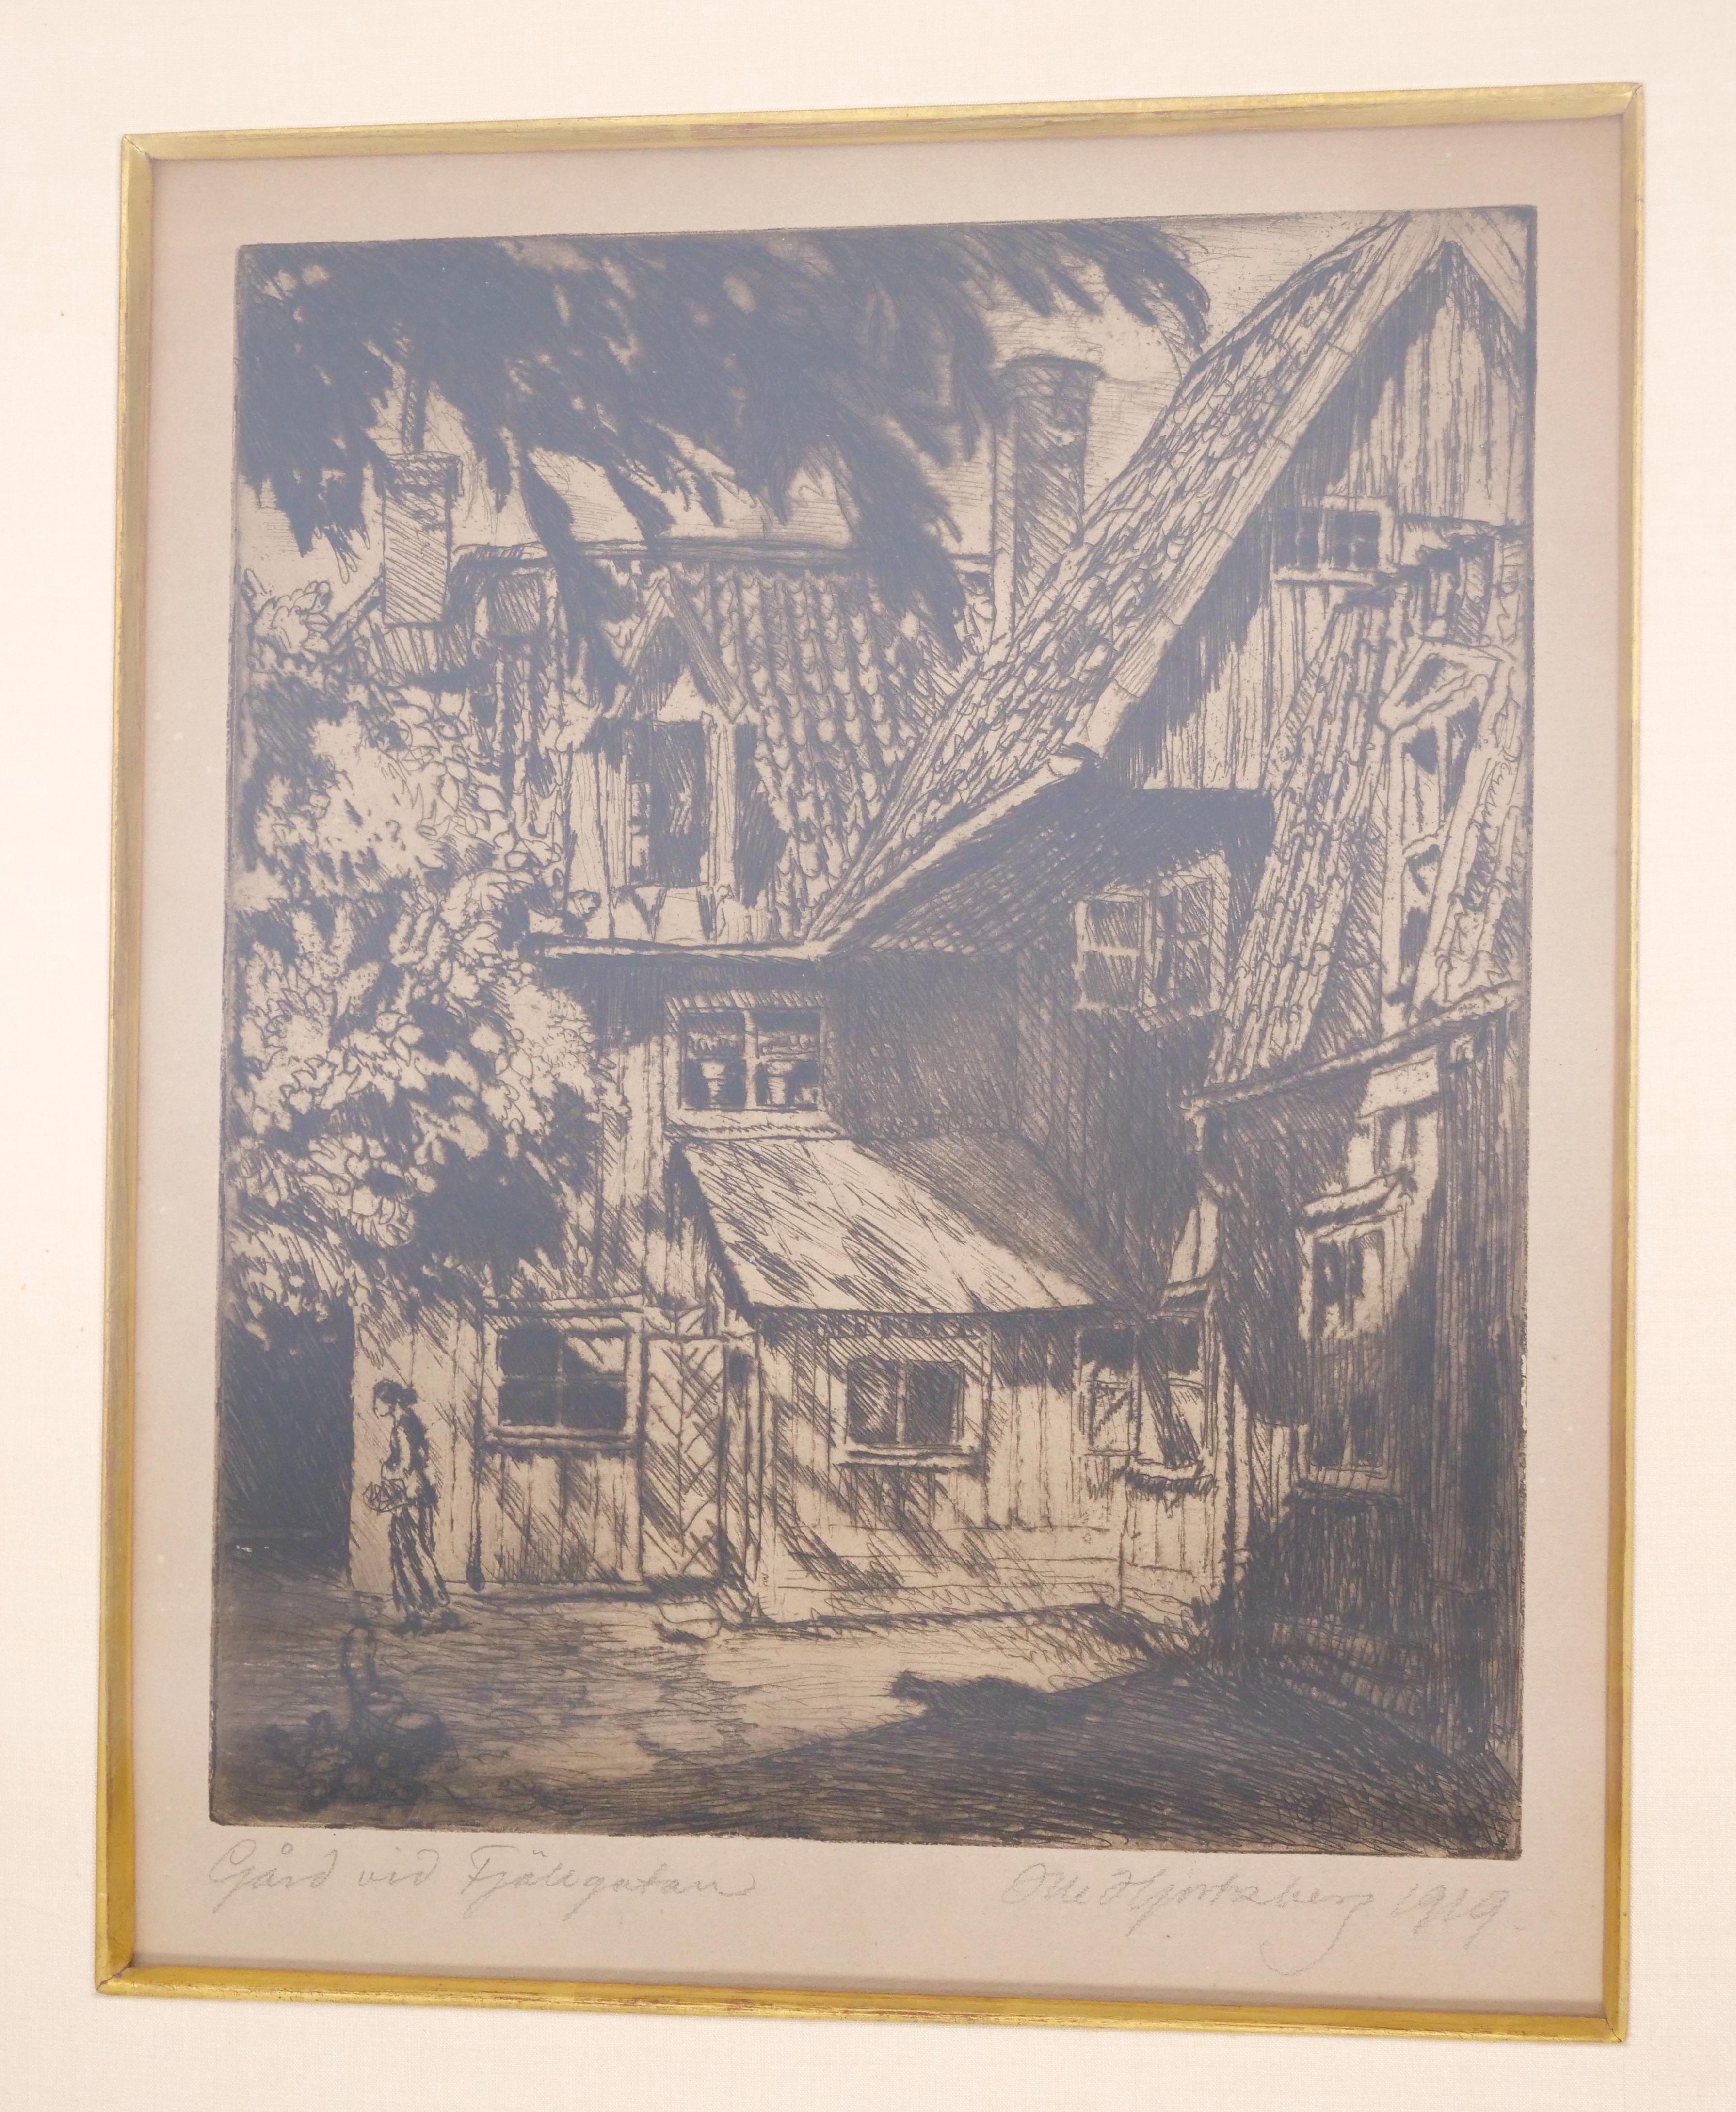 Wood Two Framed Architectural Etchings by Olle Hjortzberg (1872-1959) For Sale